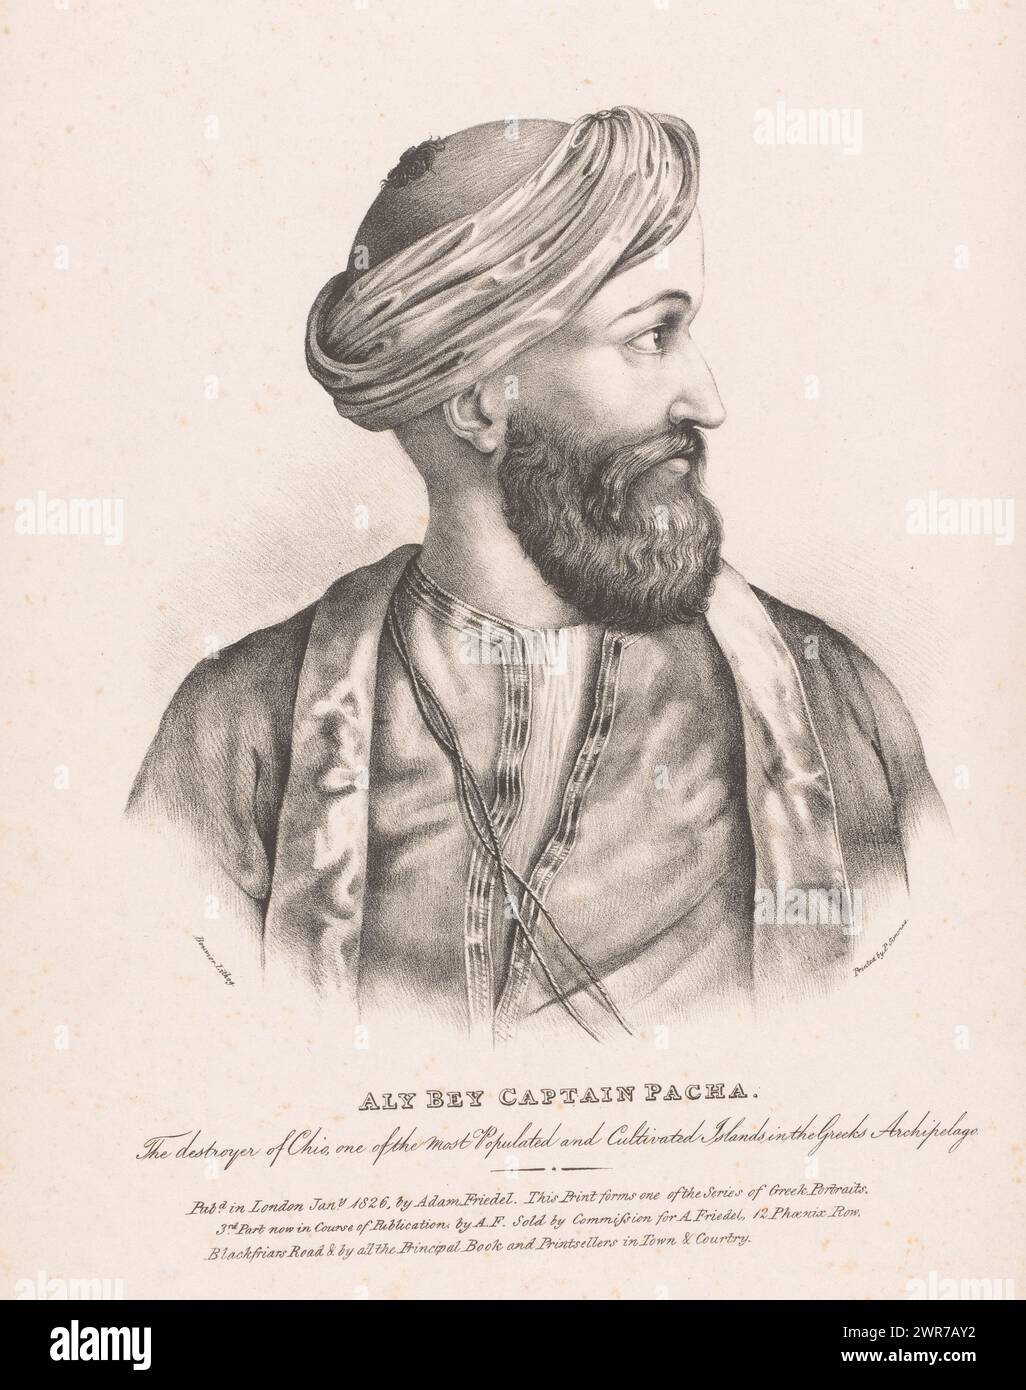 Portrait of Nasuhzade Ali, Aly Bey Captain Pacha. The destroyer of Chio, one of the most populated and cultivated Islands in the Greeks Archipelago (title on object), Portraits of figures involved in the Greek War of Independence (series title), print maker: Bouvier, printer: Pierre Simonau, publisher: Adam Friedel, London, 1826, paper, height 364 mm × width 253 mm, print Stock Photo